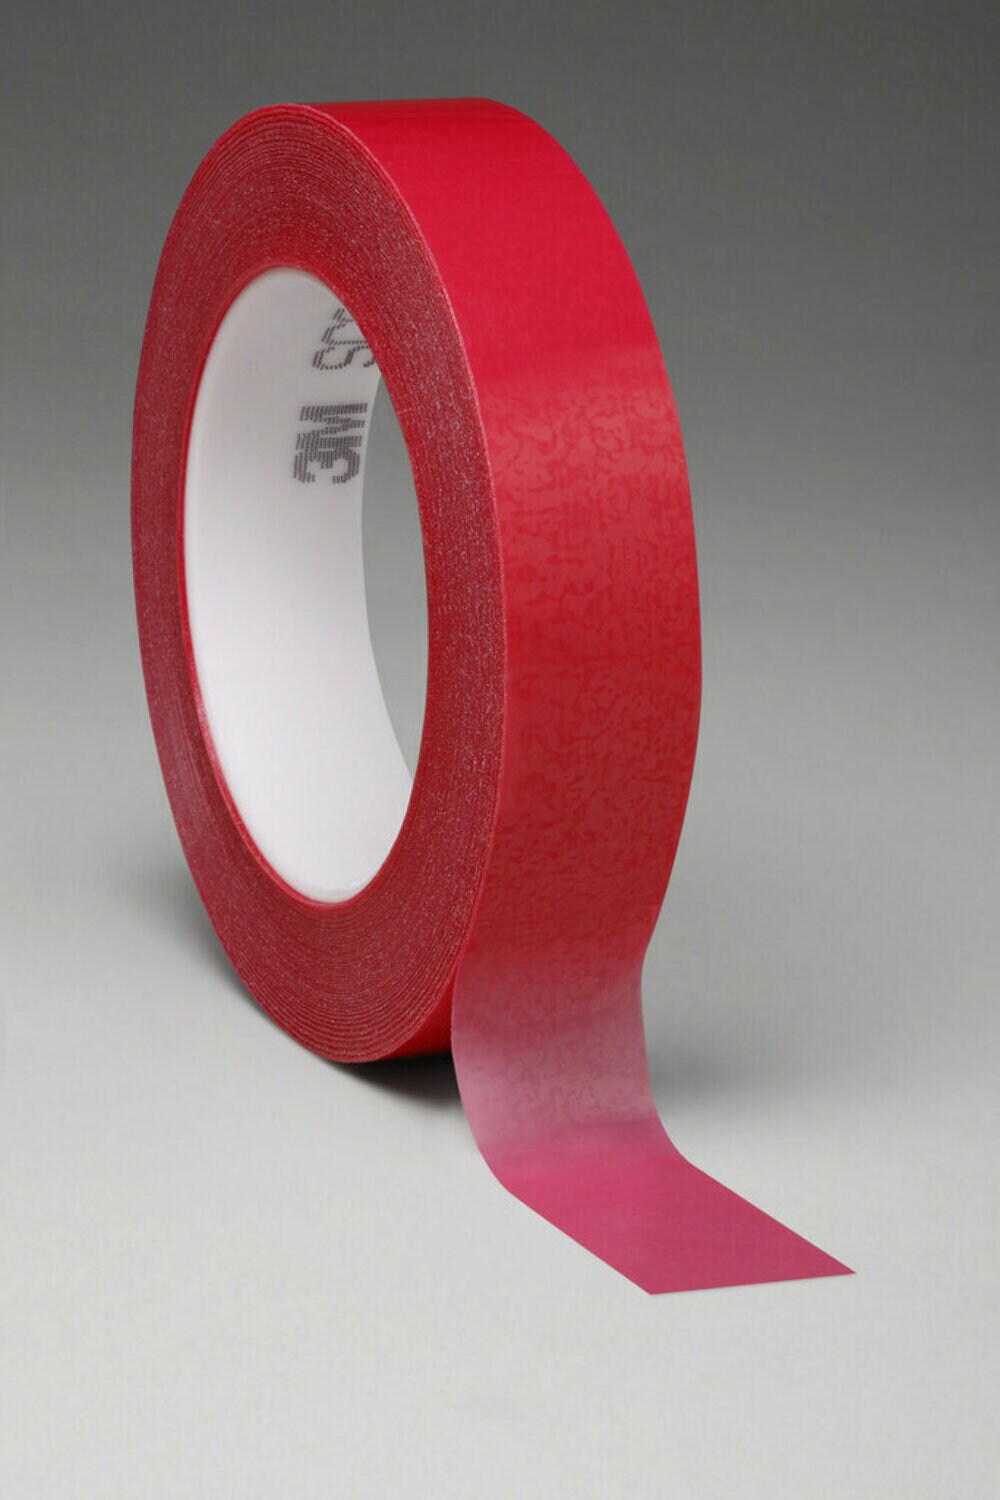 7000123311 - 3M Circuit Plating Tape 1280, Red, 1-1/2 in x 144 yd x 4.2 mil, 6/Case